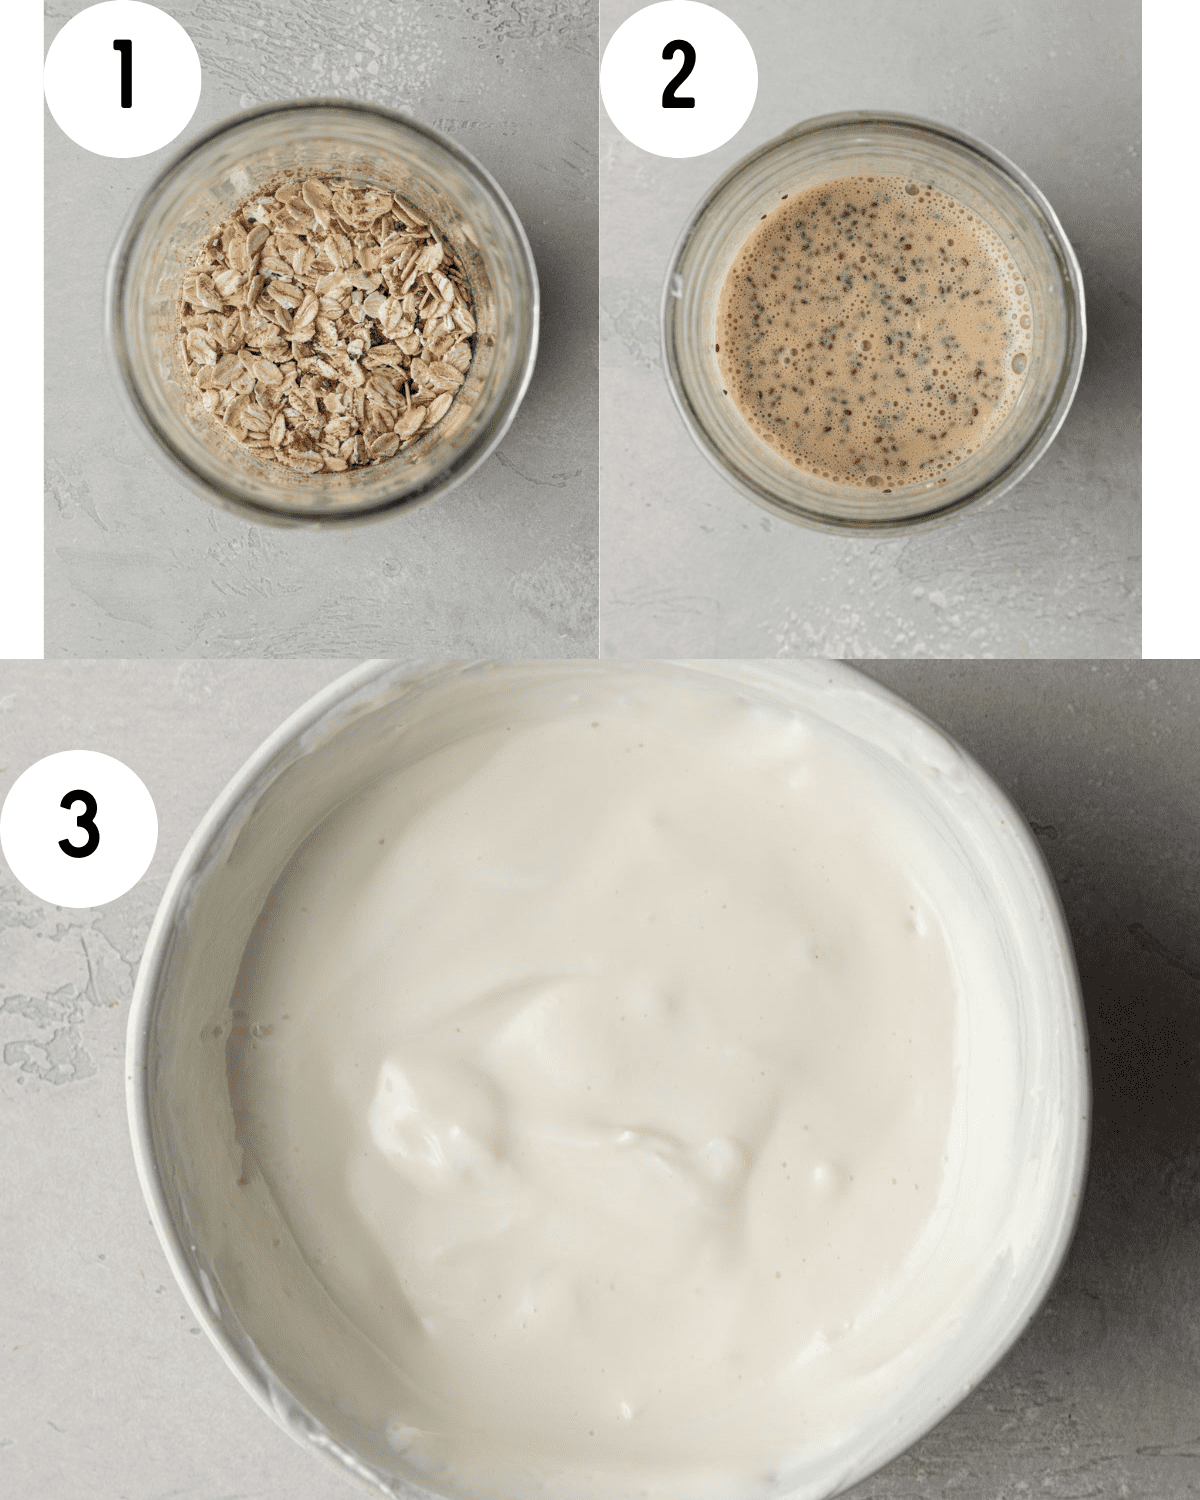 steps by step how to make overnight oats: 1. a clear mason jar filled with oats, espresso powder, and chia seeds. 2. milk, yogurt, and syrup mixed in. 3. yogurt layers mixed together in a white bowl. 